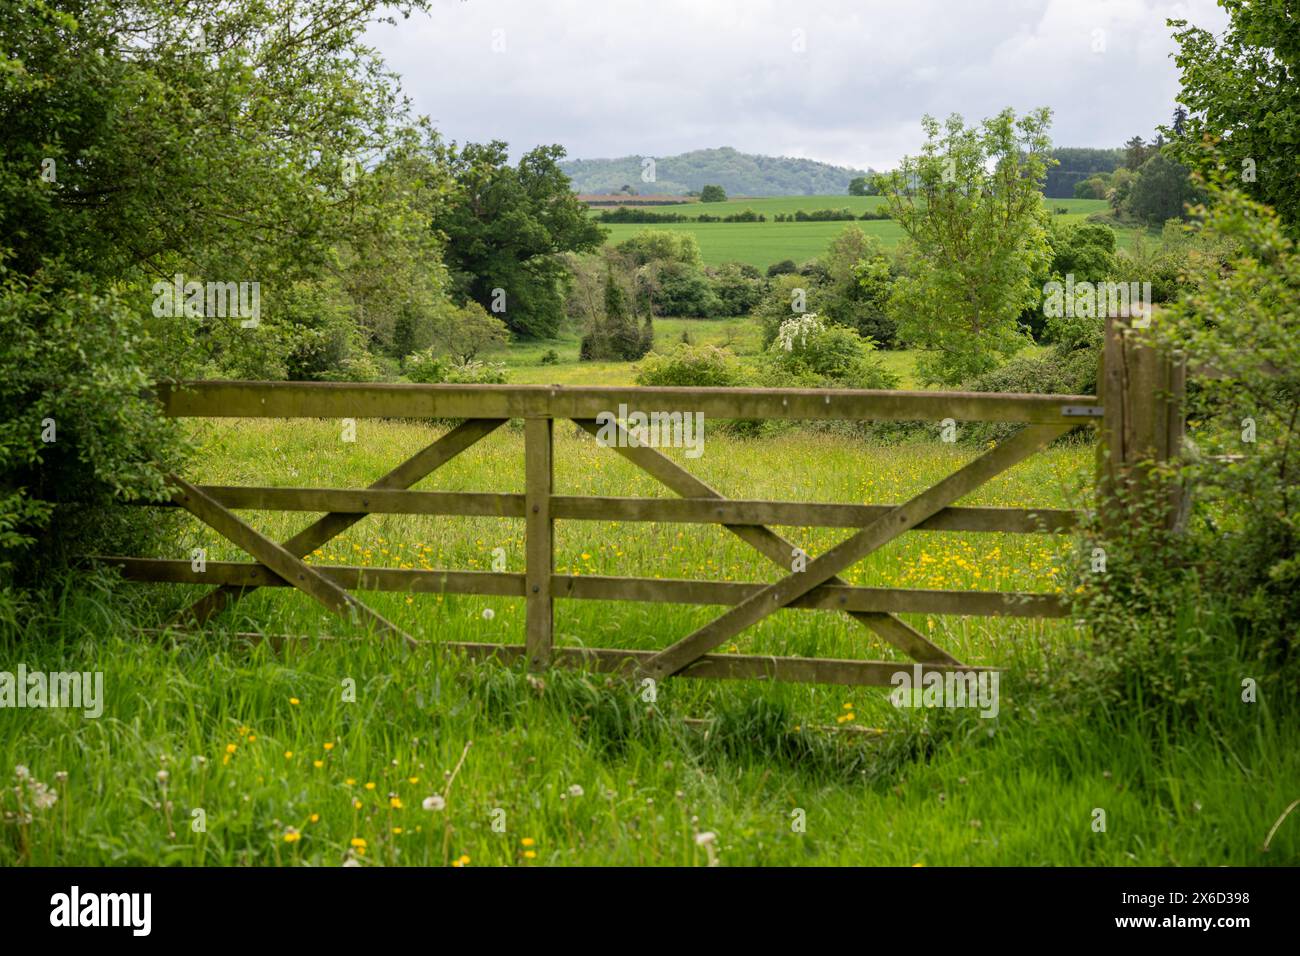 A little used wooden five bar gate in a field surrounded by long grass, buttercups and wild flowers with hills and sky in the background. Stock Photo